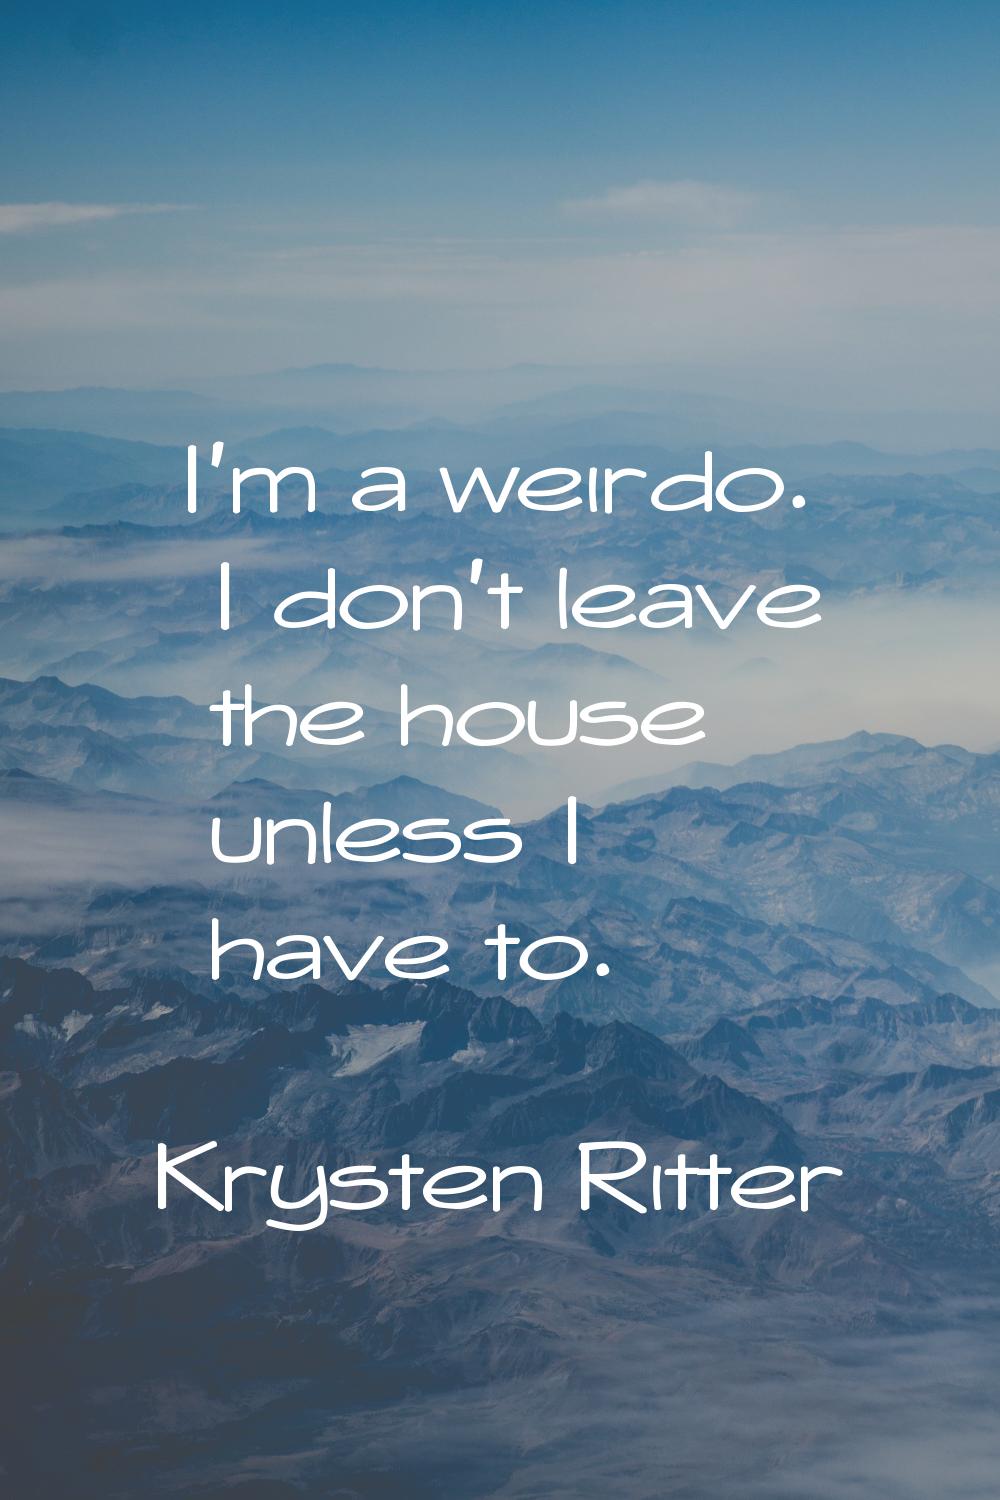 I'm a weirdo. I don't leave the house unless I have to.